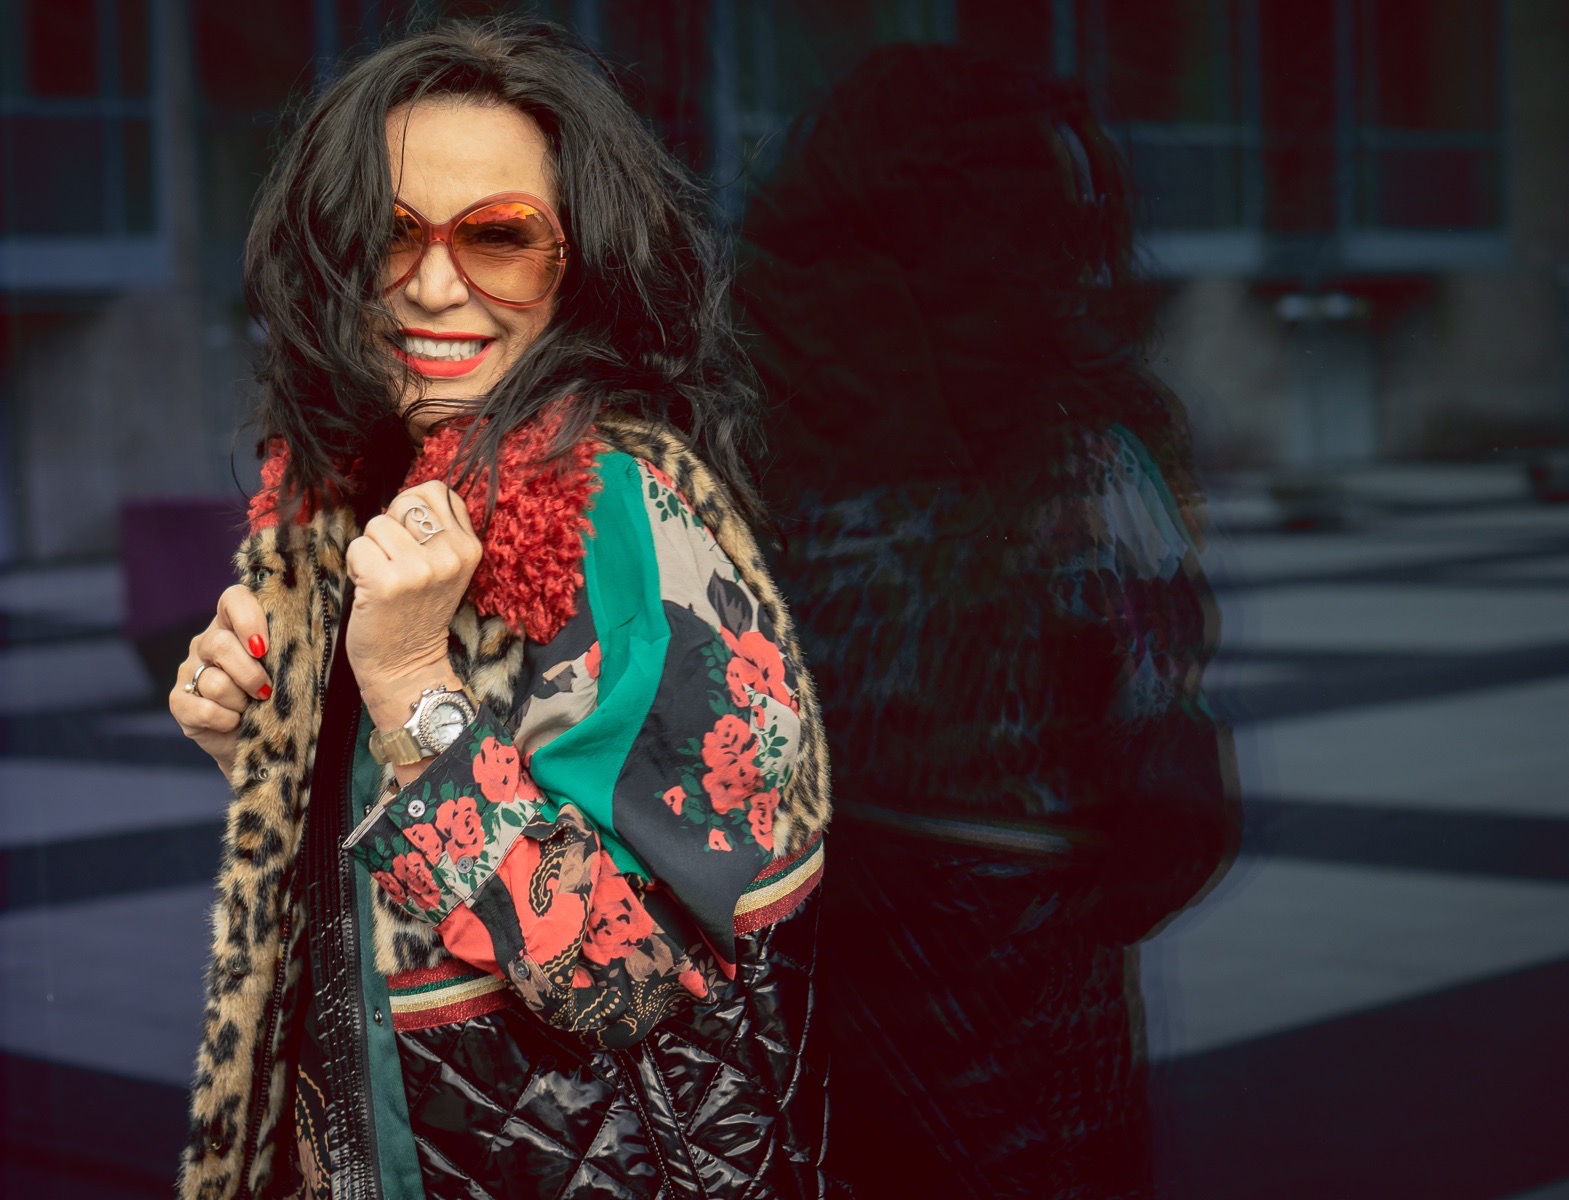 Yippie Hippie Style, Top and Vest Yippie Hippie, Tom Ford shades, eyewearblogger, streetstyle, stylish fashion, fall outfit, mystyle, jewelryblogger, style for ladies, over50, 50plusandfaboulus, fashionphotography, fashion and travel, ageless fashion, ageless style, colors, leoprint